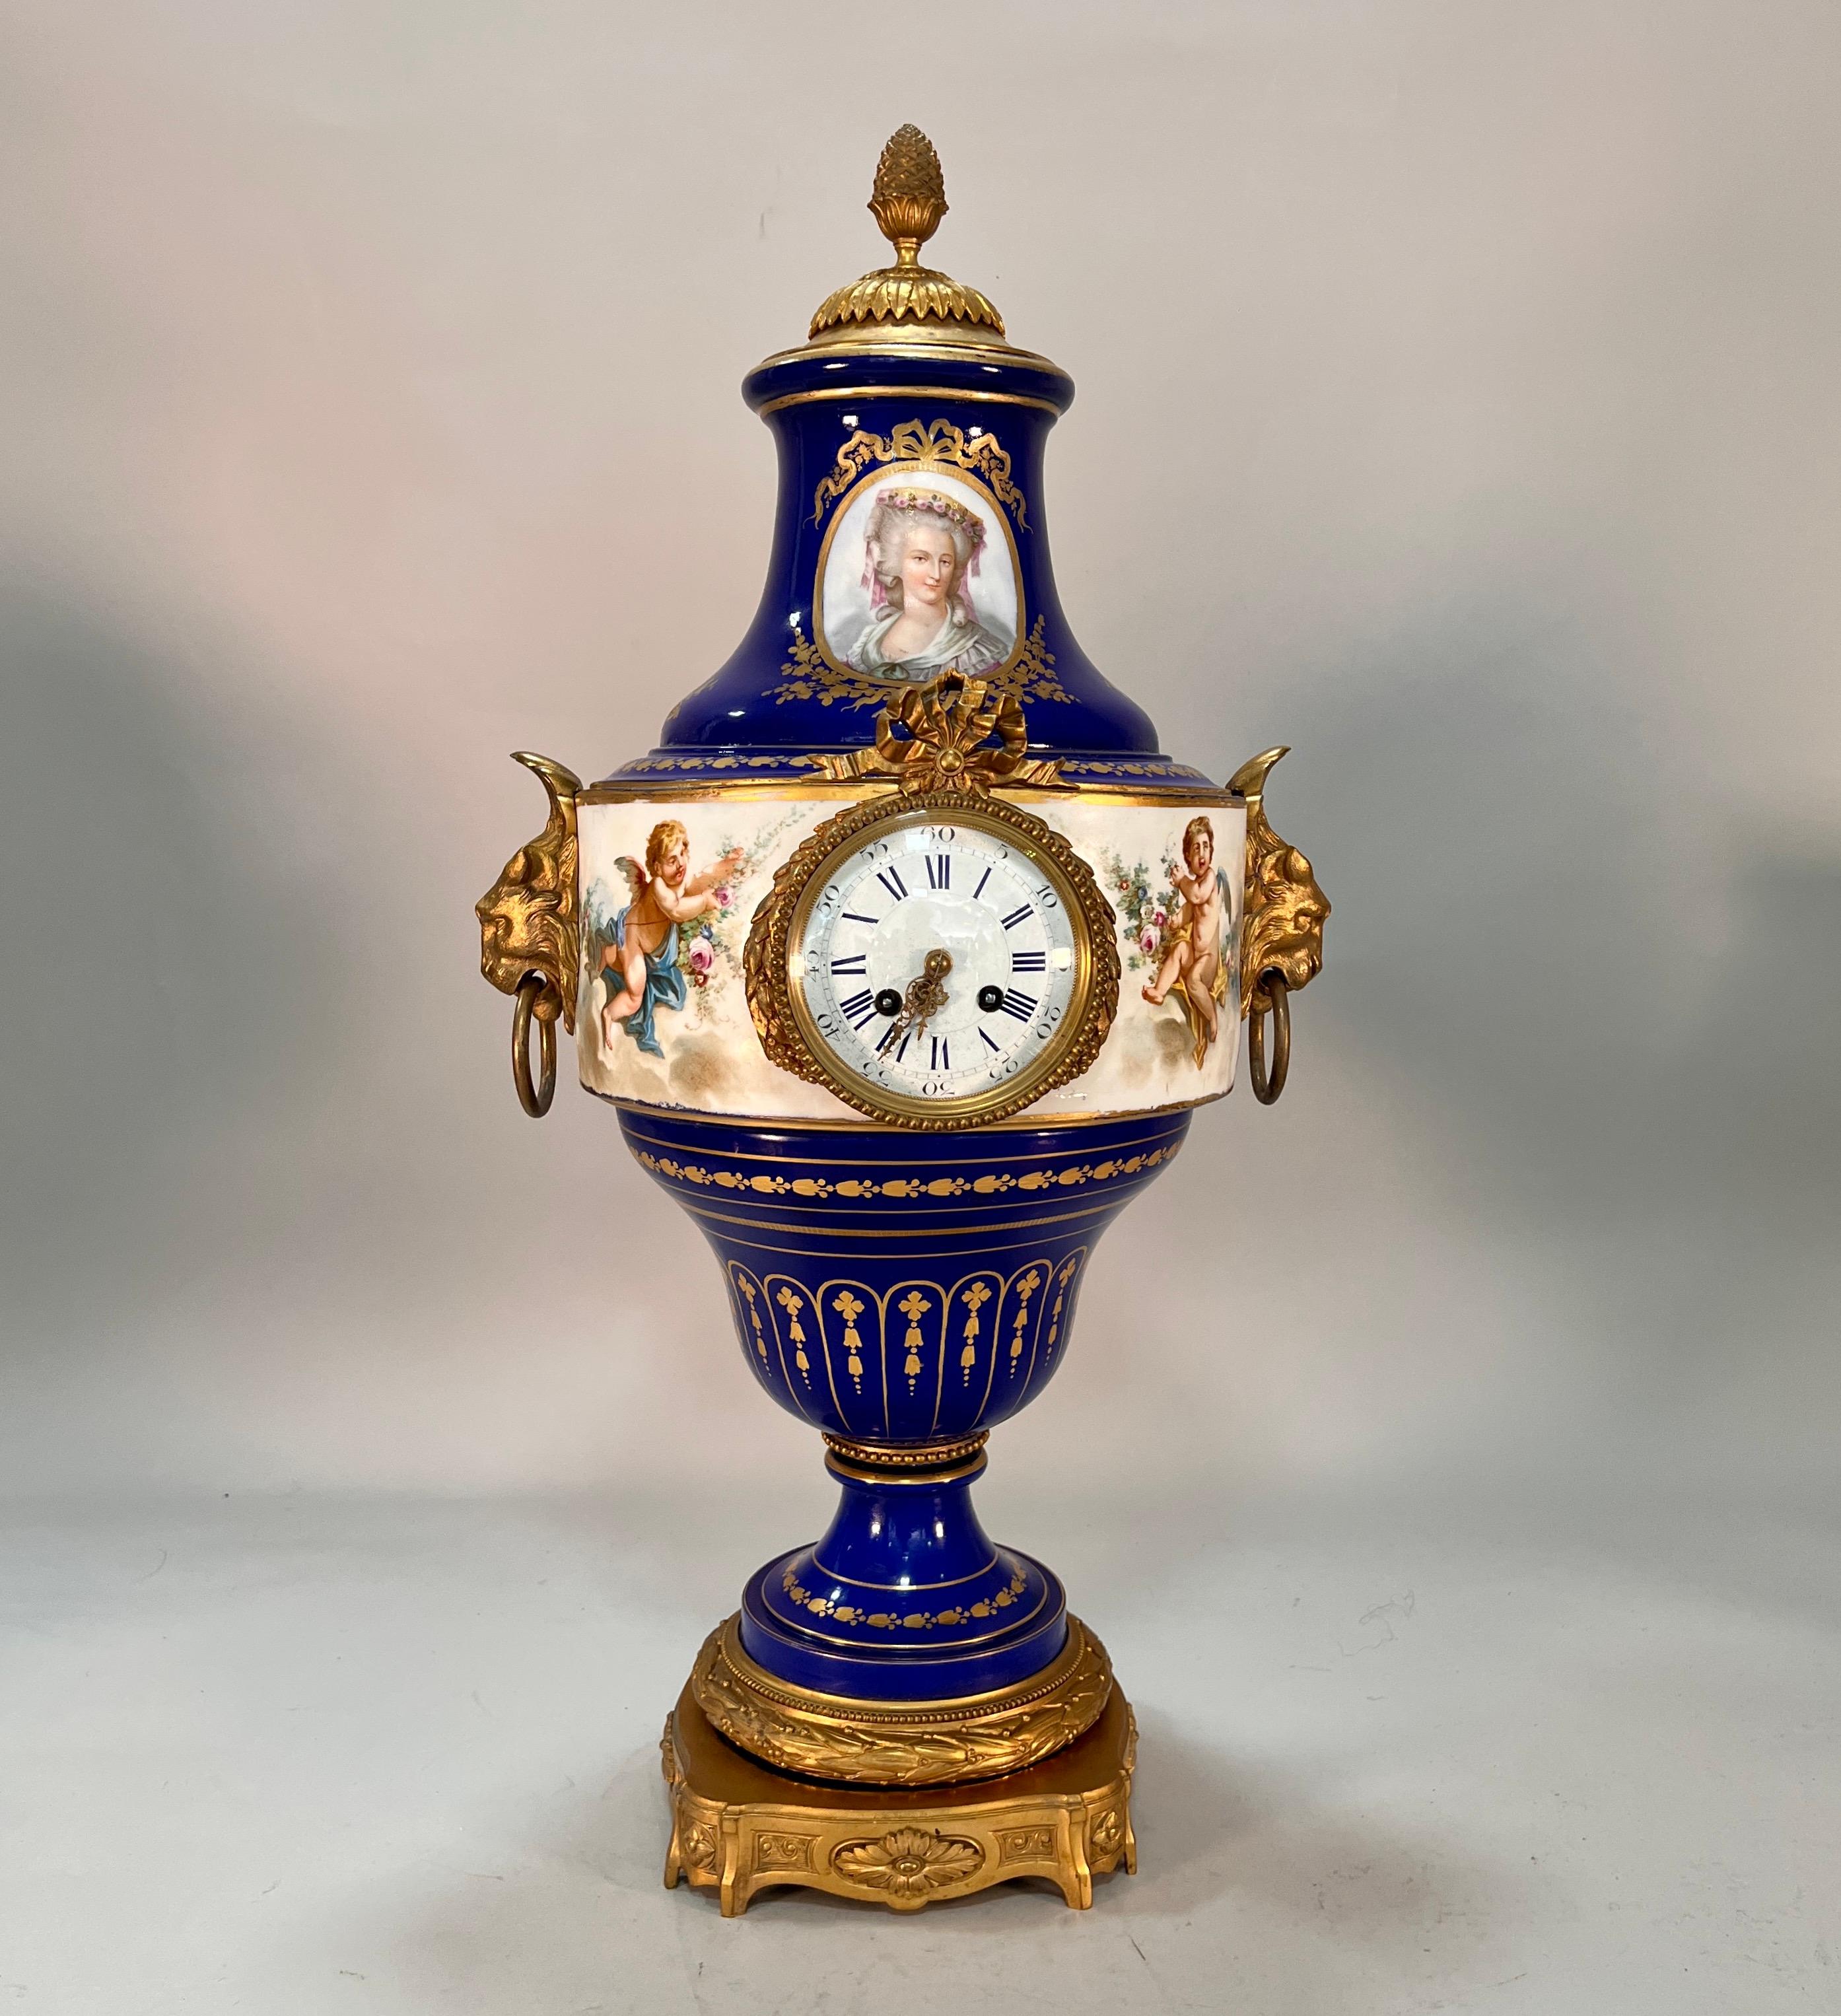 A stunning 19th century French Sevres mantel clock in the baluster shape. style baluster shaped mantel clock. The neck adorned with a two painted oval portraits of elegant ladies. Each portrait captures the grace and beauty of the ladies with